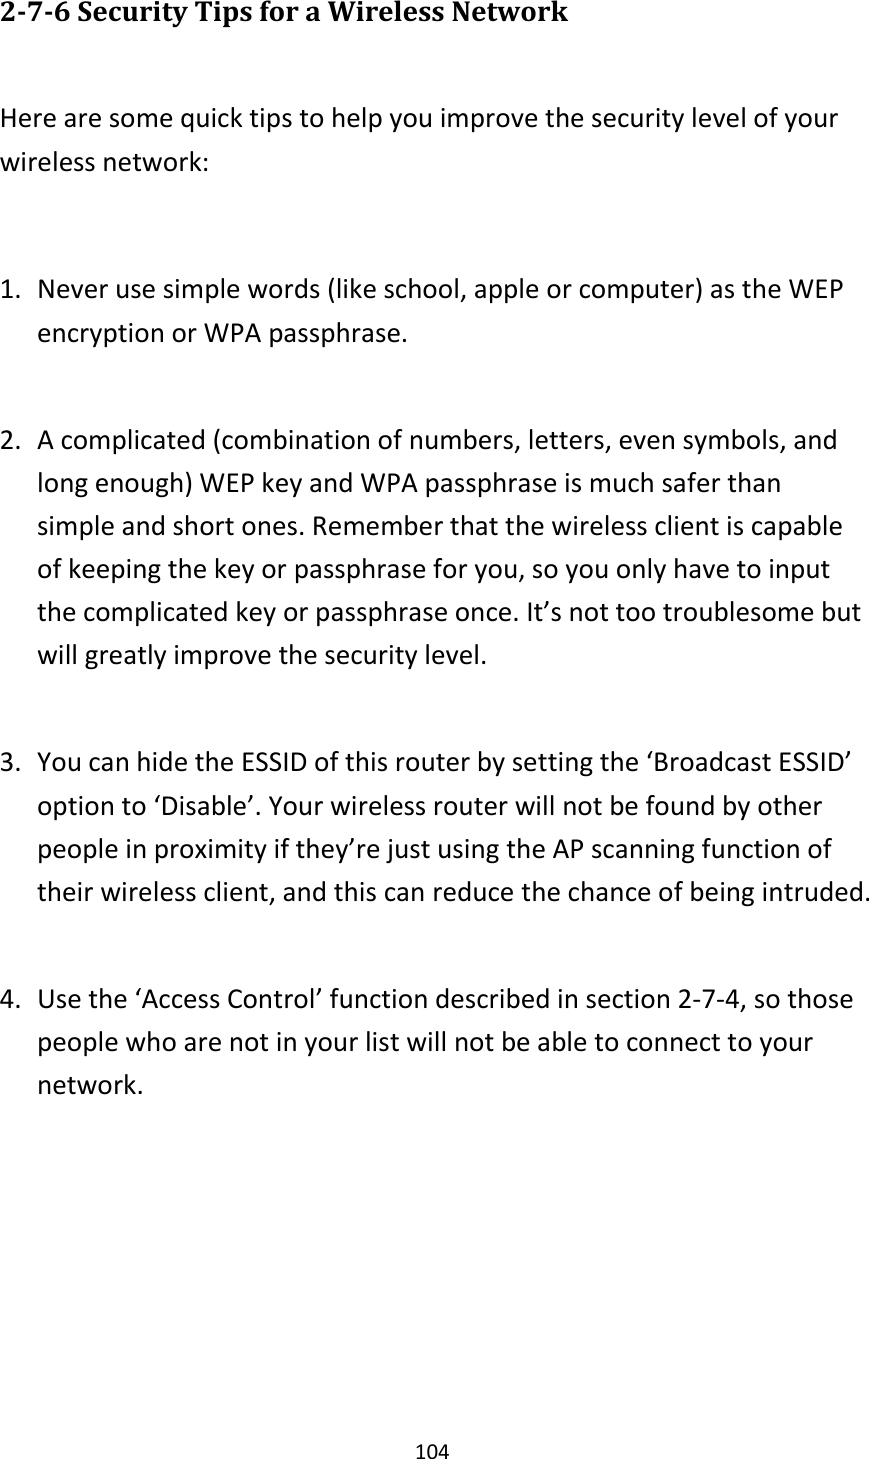 104 2-7-6 Security Tips for a Wireless Network  Here are some quick tips to help you improve the security level of your wireless network:  1. Never use simple words (like school, apple or computer) as the WEP encryption or WPA passphrase.  2. A complicated (combination of numbers, letters, even symbols, and long enough) WEP key and WPA passphrase is much safer than simple and short ones. Remember that the wireless client is capable of keeping the key or passphrase for you, so you only have to input the complicated key or passphrase once. It’s not too troublesome but will greatly improve the security level.  3. You can hide the ESSID of this router by setting the ‘Broadcast ESSID’ option to ‘Disable’. Your wireless router will not be found by other people in proximity if they’re just using the AP scanning function of their wireless client, and this can reduce the chance of being intruded.  4. Use the ‘Access Control’ function described in section 2-7-4, so those people who are not in your list will not be able to connect to your network. 